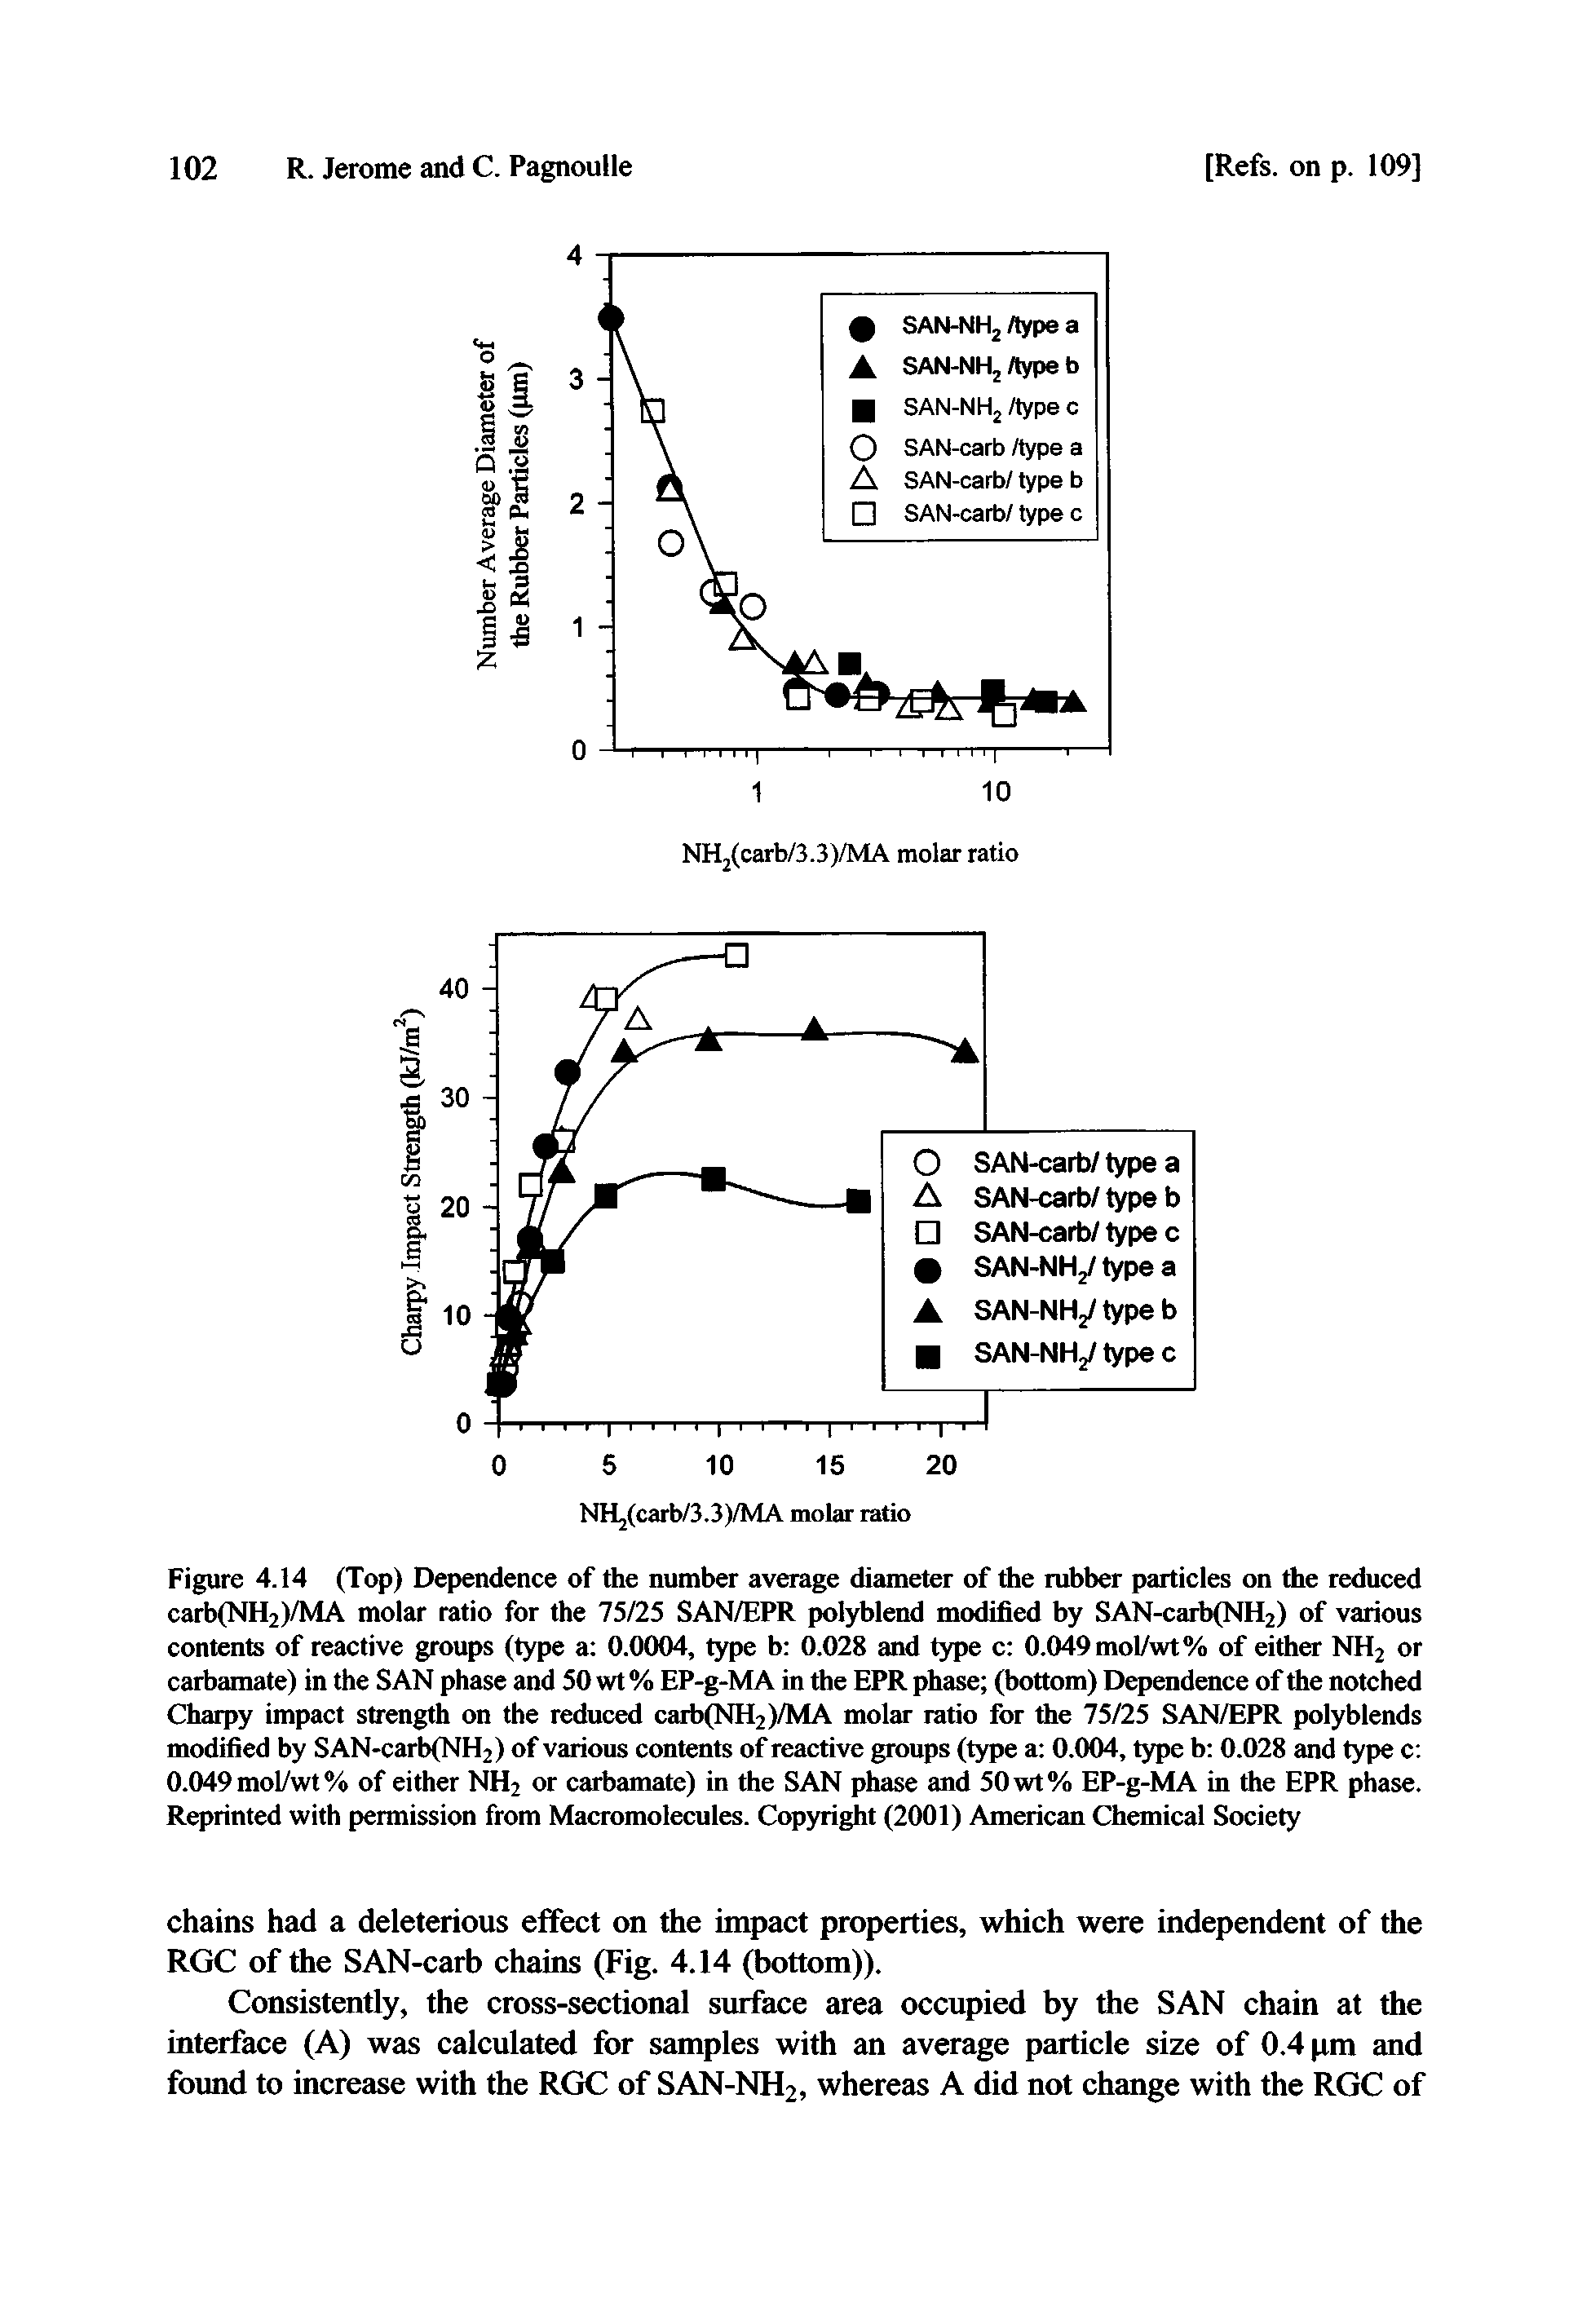 Figure 4.14 (Top) Dependence of the number average diameter of die rubber particles on the reduced carb(NH2)/MA molar ratio for the 75/25 SAN/EPR polyblend modified by SAN-carb(NH2) of various contents of reactive groups (type a 0.0004, type b 0.028 and type c 0.049 mol/wt% of either NH2 or carbamate) in the SAN phase and 50 wt % EP-g-MA in die EPR phase (bottom) Dependence of the notched Charpy impact strength on the reduced carb(NH2)/MA molar ratio for die 75/25 SAN/EPR polyblends modified by SAN>carb(NH2) of various contents of reactive groups (type a 0.004, type b 0.028 and type c 0.049 mol/wt% of either NH2 or carbamate) in the SAN phase and 50wt% EP-g-MA in the EPR phase. Reprinted with permission from Macromolecules. Copyright (2001) American Chemical Society...